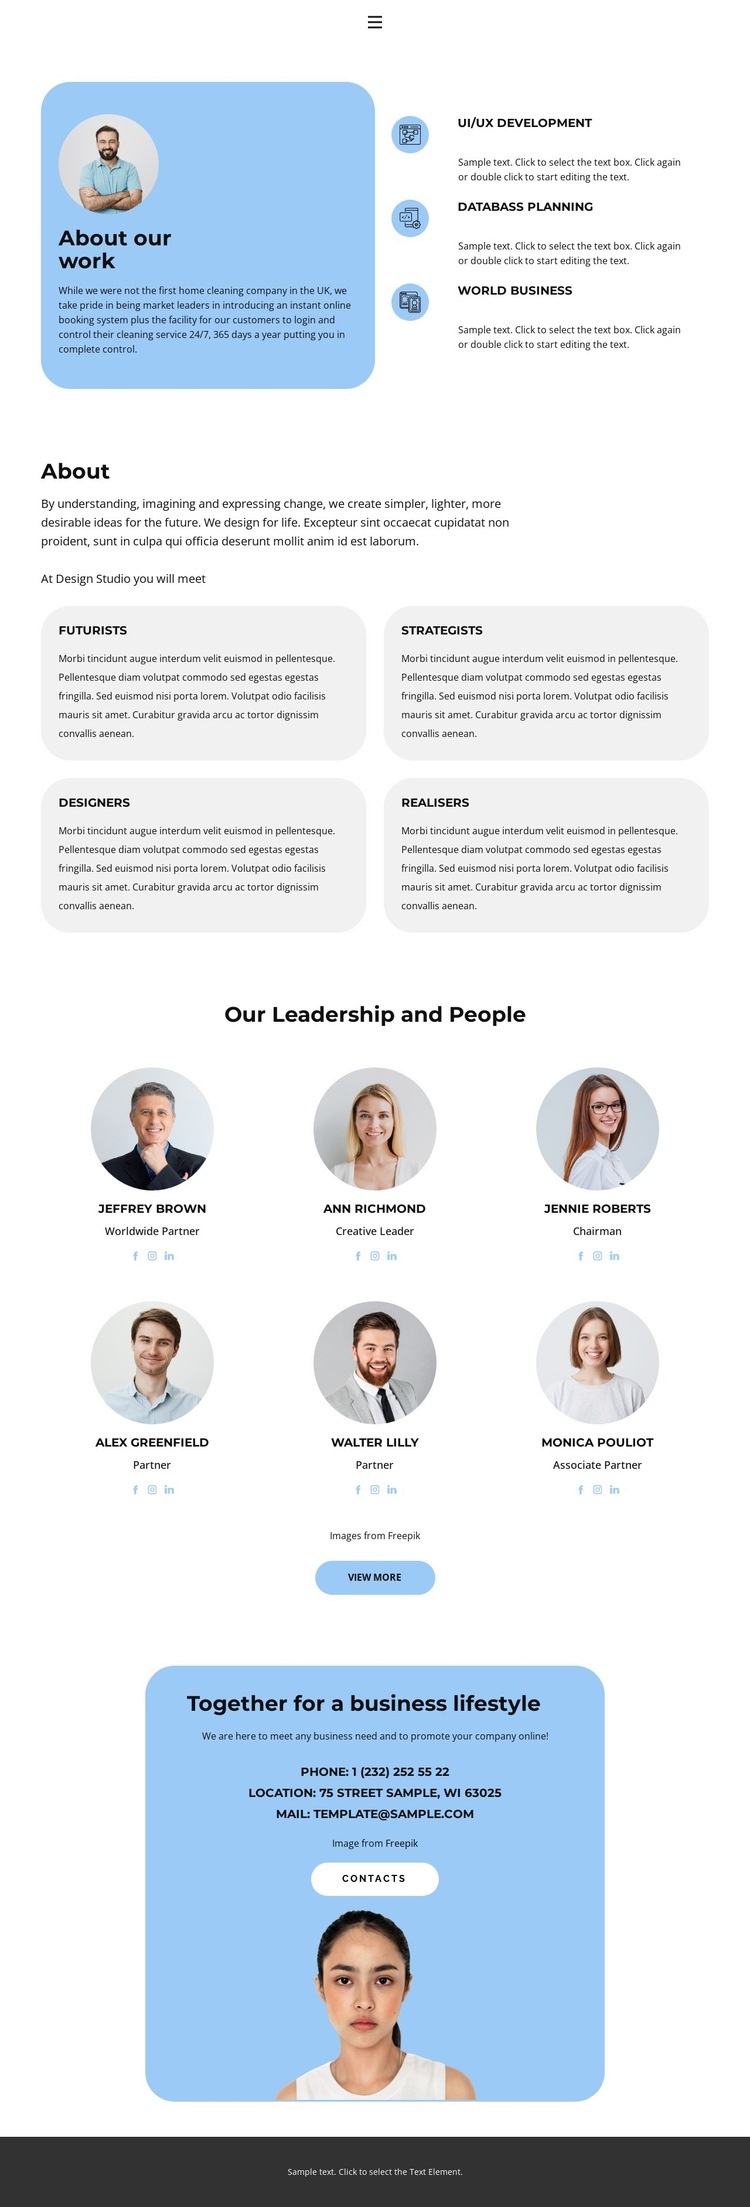 We work together Squarespace Template Alternative